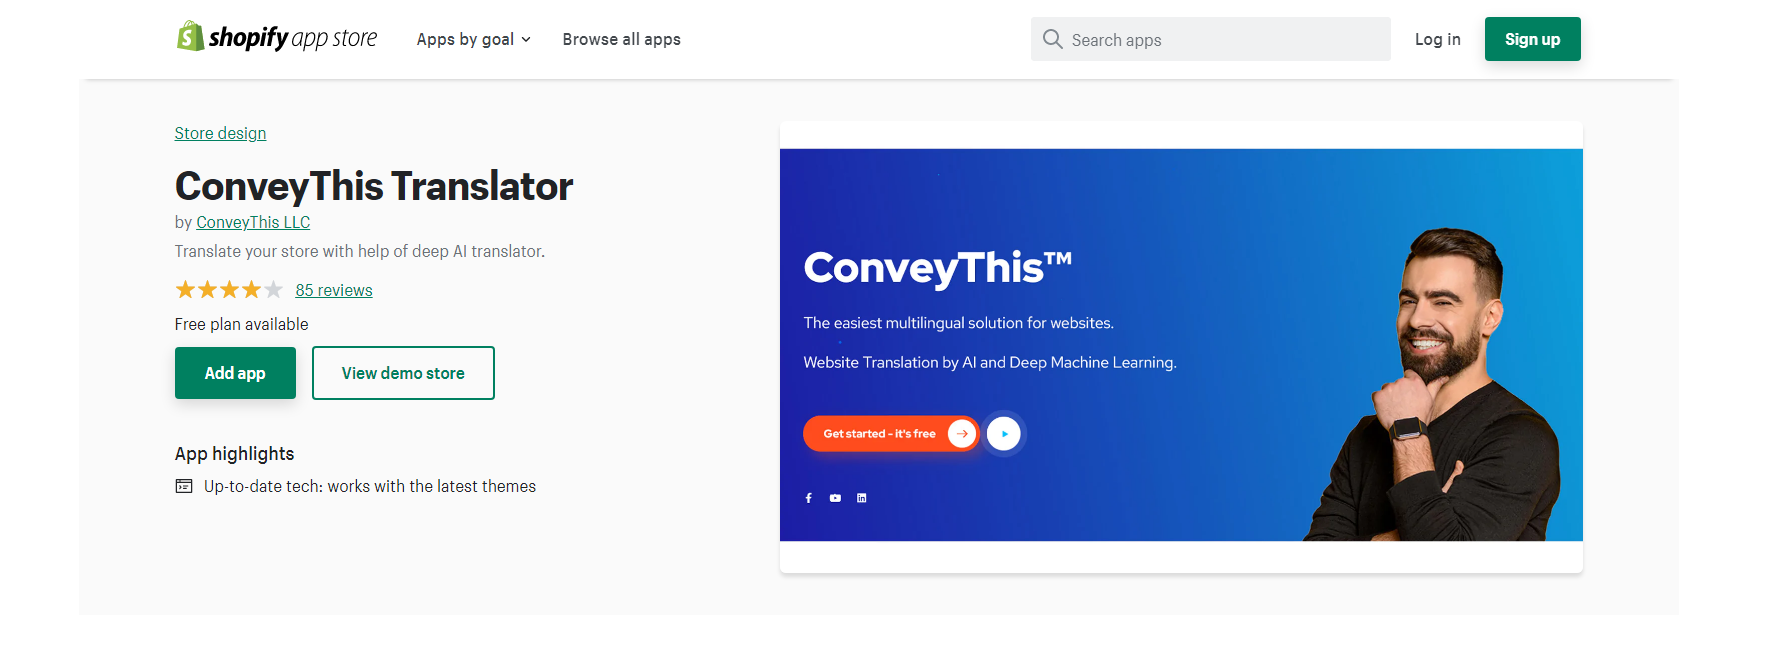 ConveyThis - shopify translation apps